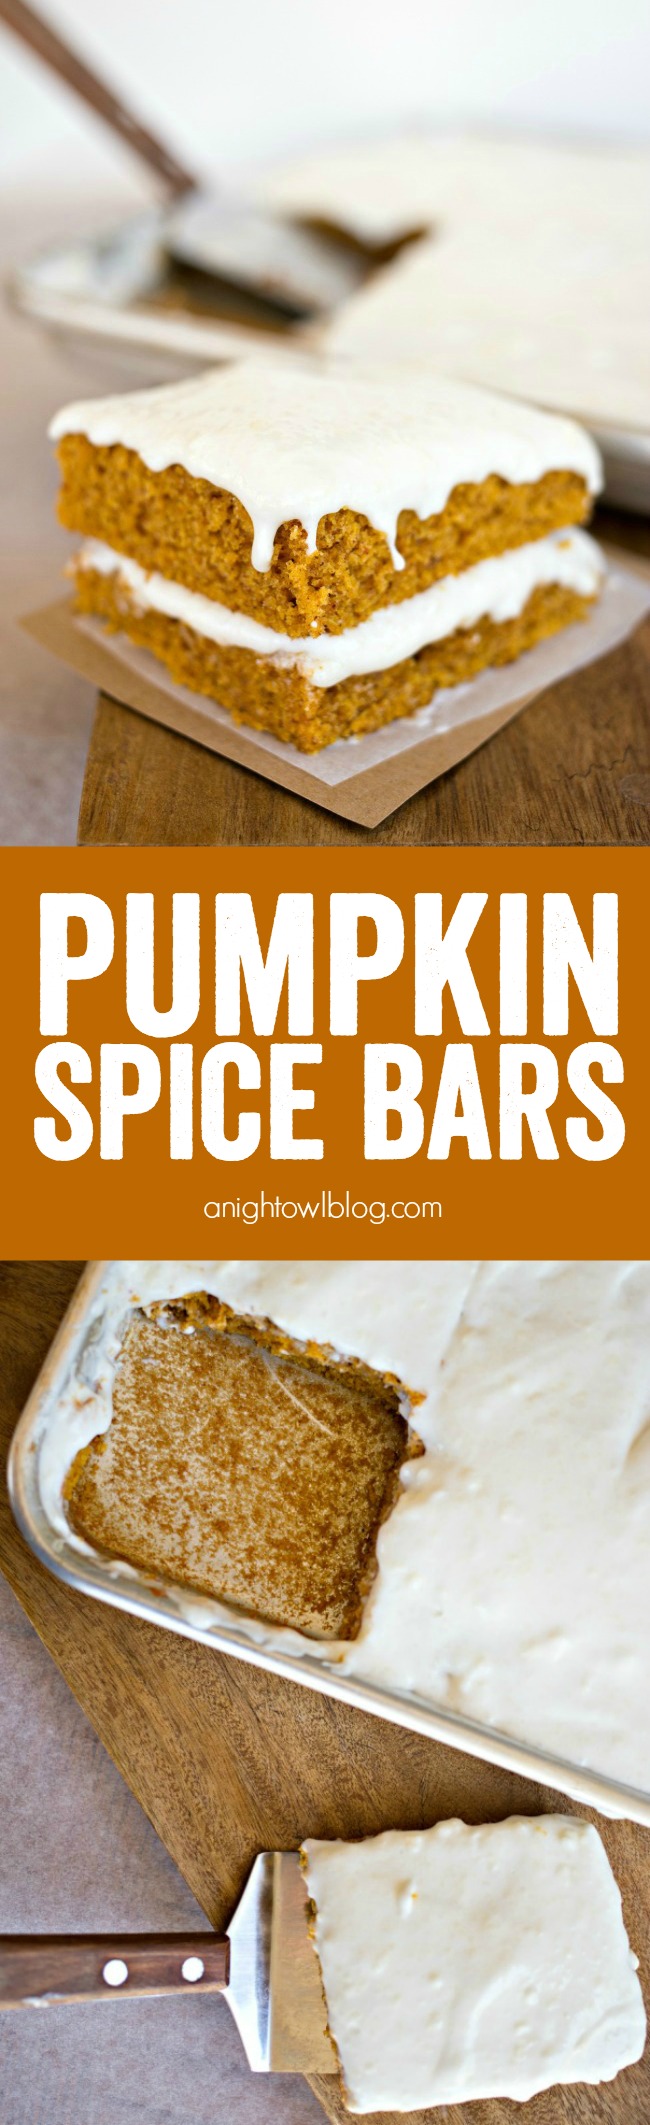 These Pumpkin Spice Bars with cream cheese frosting are moist, delicious and packed full of flavor!